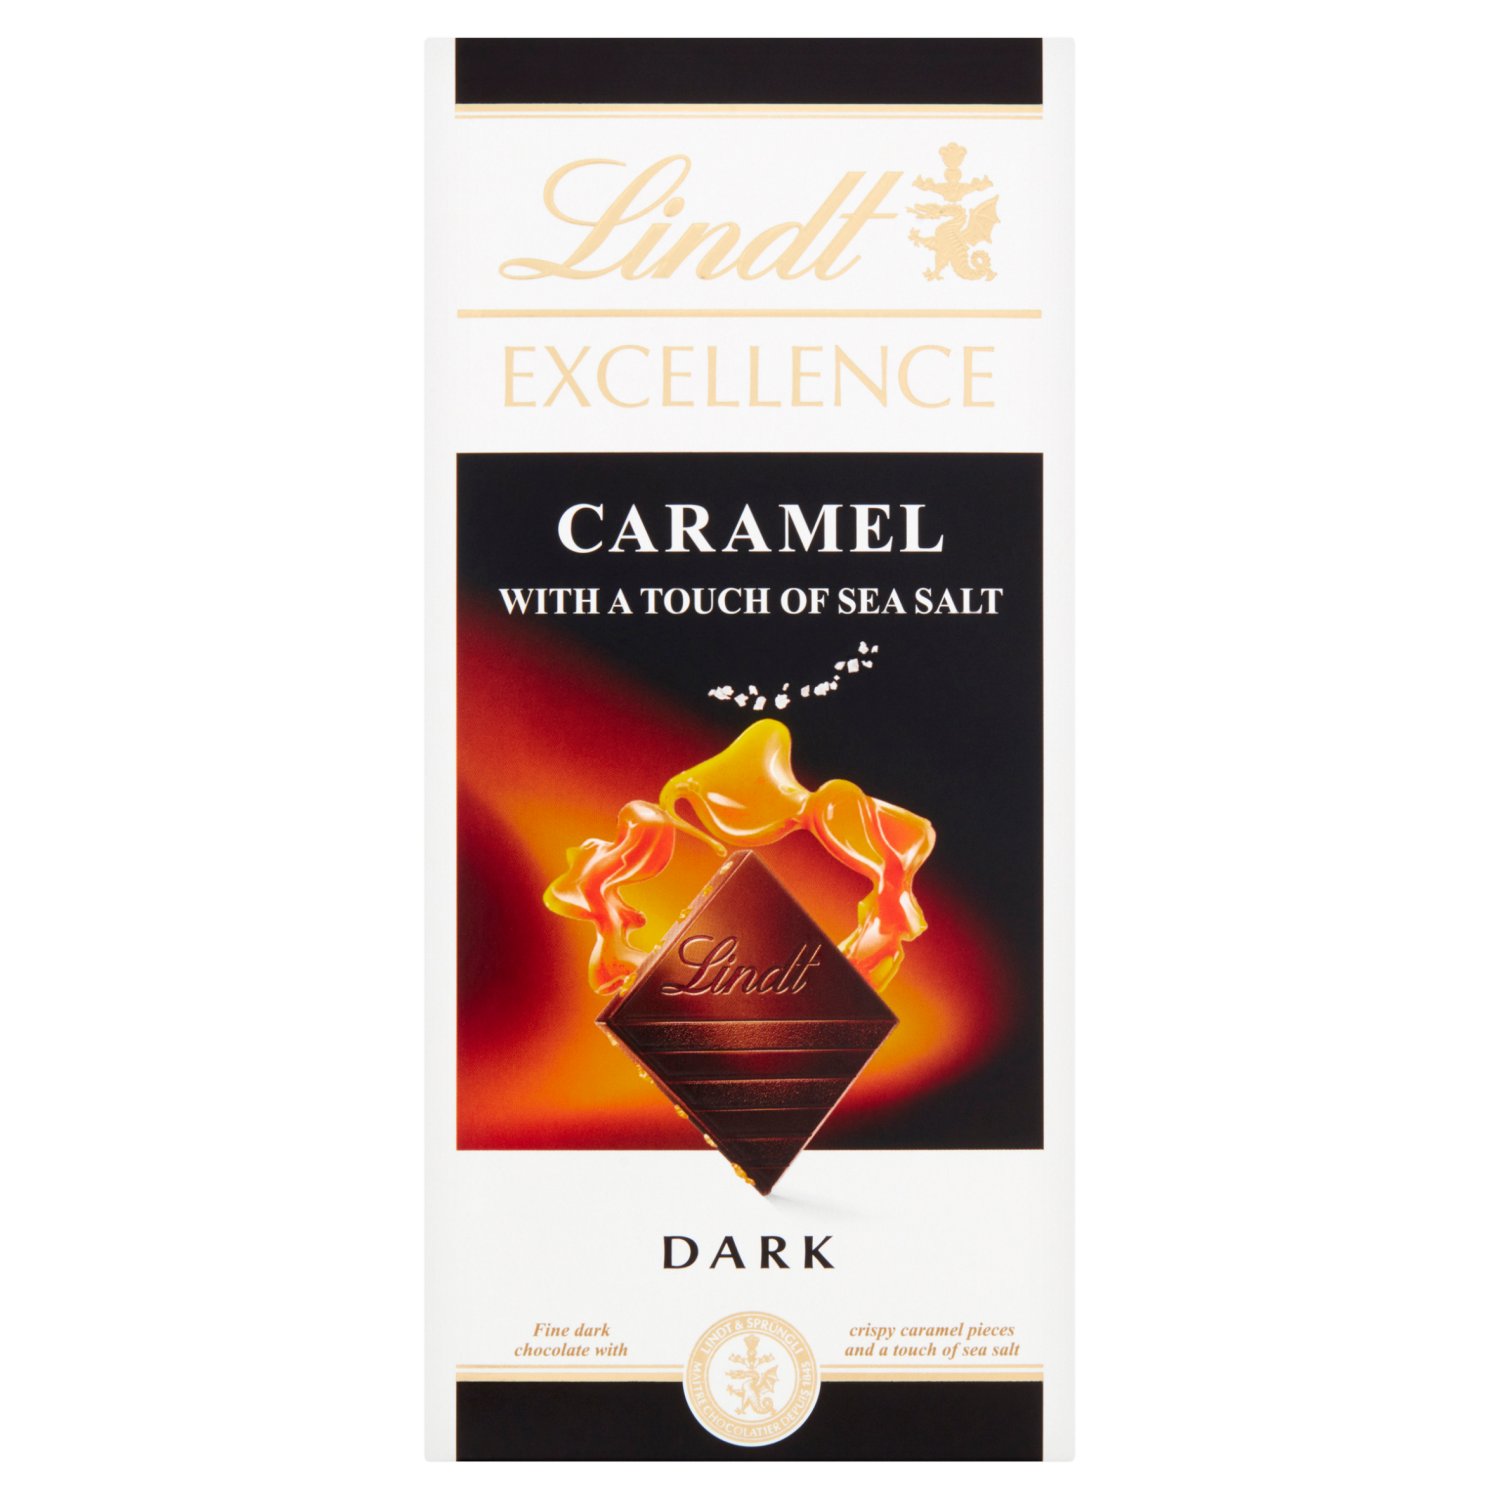 Enliven your senses with the ultimate chocolate luxury, Lindt Excellence. With this range, you will discover the expertise and craftsmanship of our Lindt Master Chocolatiers in blending the most aromatic cocoa beans with the finest ingredients, to create a rich and refined chocolate of intense flavour and elegant texture.

Lindt Excellence Caramel Sea Salt is a delicate blend of luxurious and rich dark chocolate with crispy caramel pieces combined with delicate, hand harvested sea salt crystals for an experience to treat all the senses.